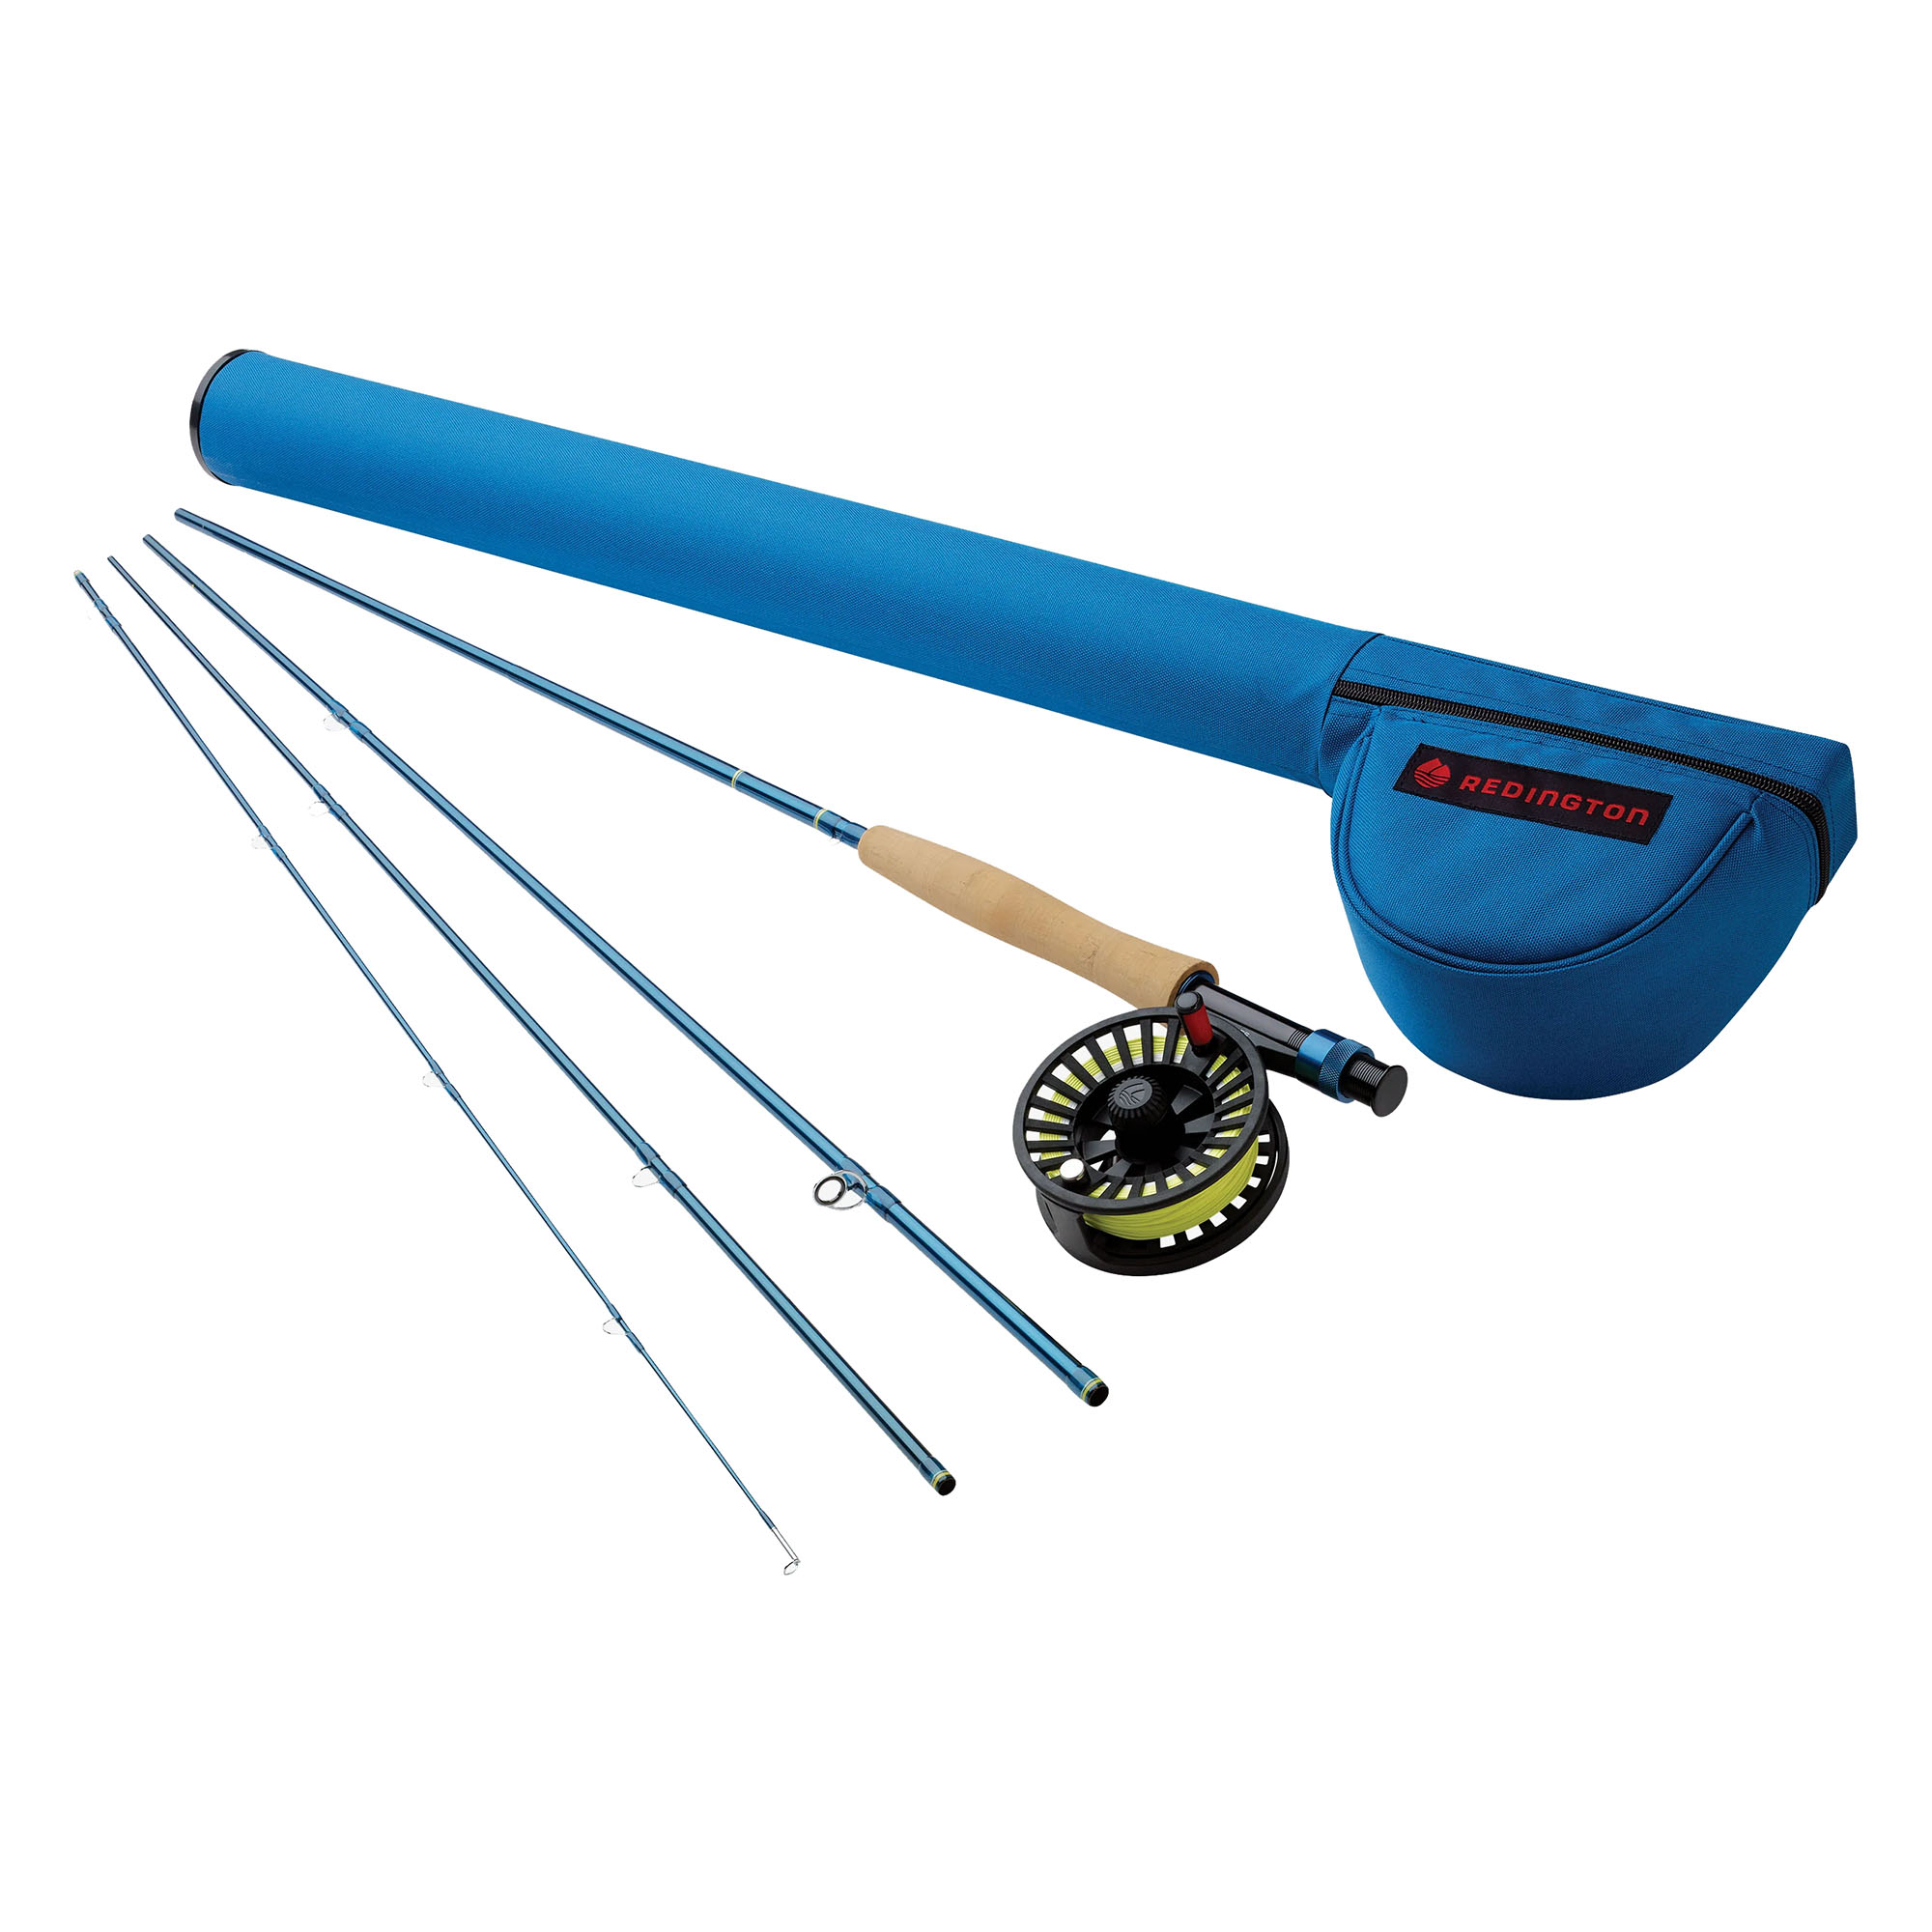 Redington CROSSWATER Fly Outfit – Guide Flyfishing, Fly Fishing Rods, Reels, Sage, Redington, RIO